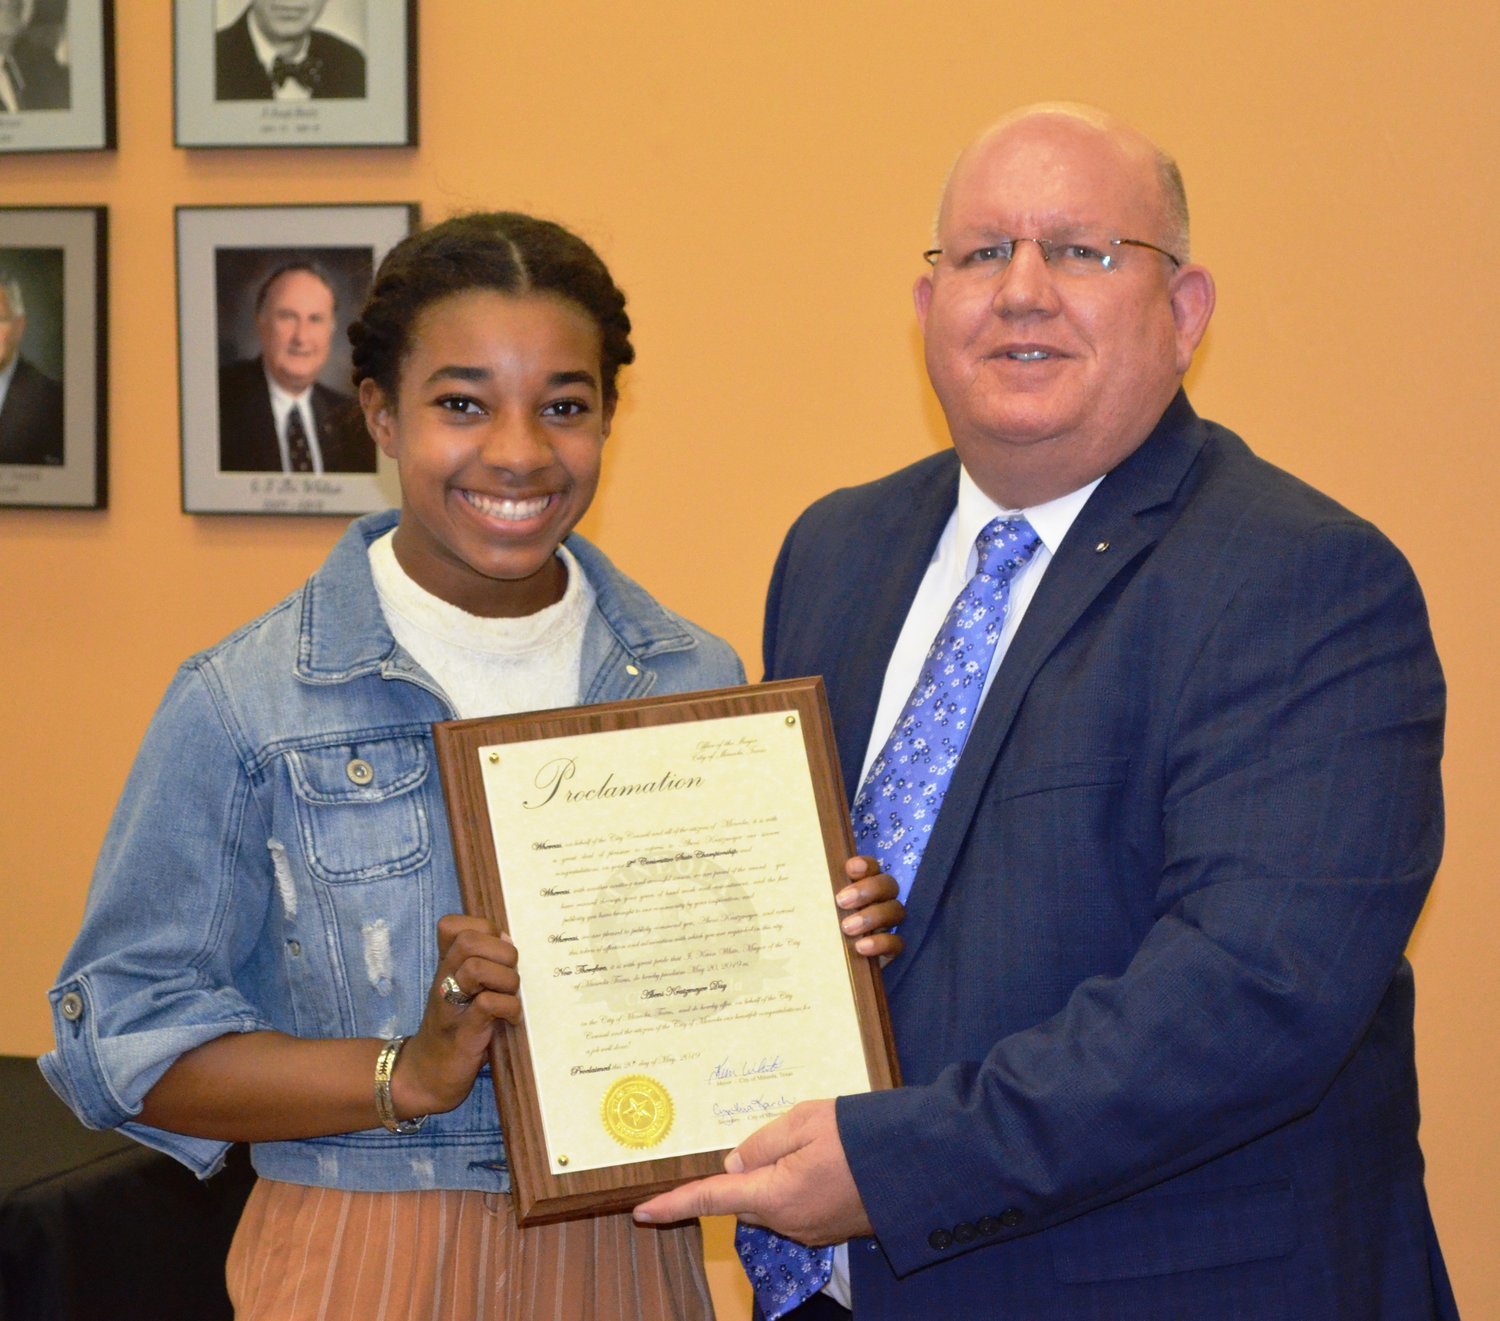 Mineola Mayor Kevin White presents a proclamation to Mineola High School’s Abeni Kratzmeyer at Monday’s Mineola City Council meeting in recognition of her second class 3A state pole vaulting title. White proclaimed Monday, May 20 as Abeni Kratzmeyer Day in Mineola.